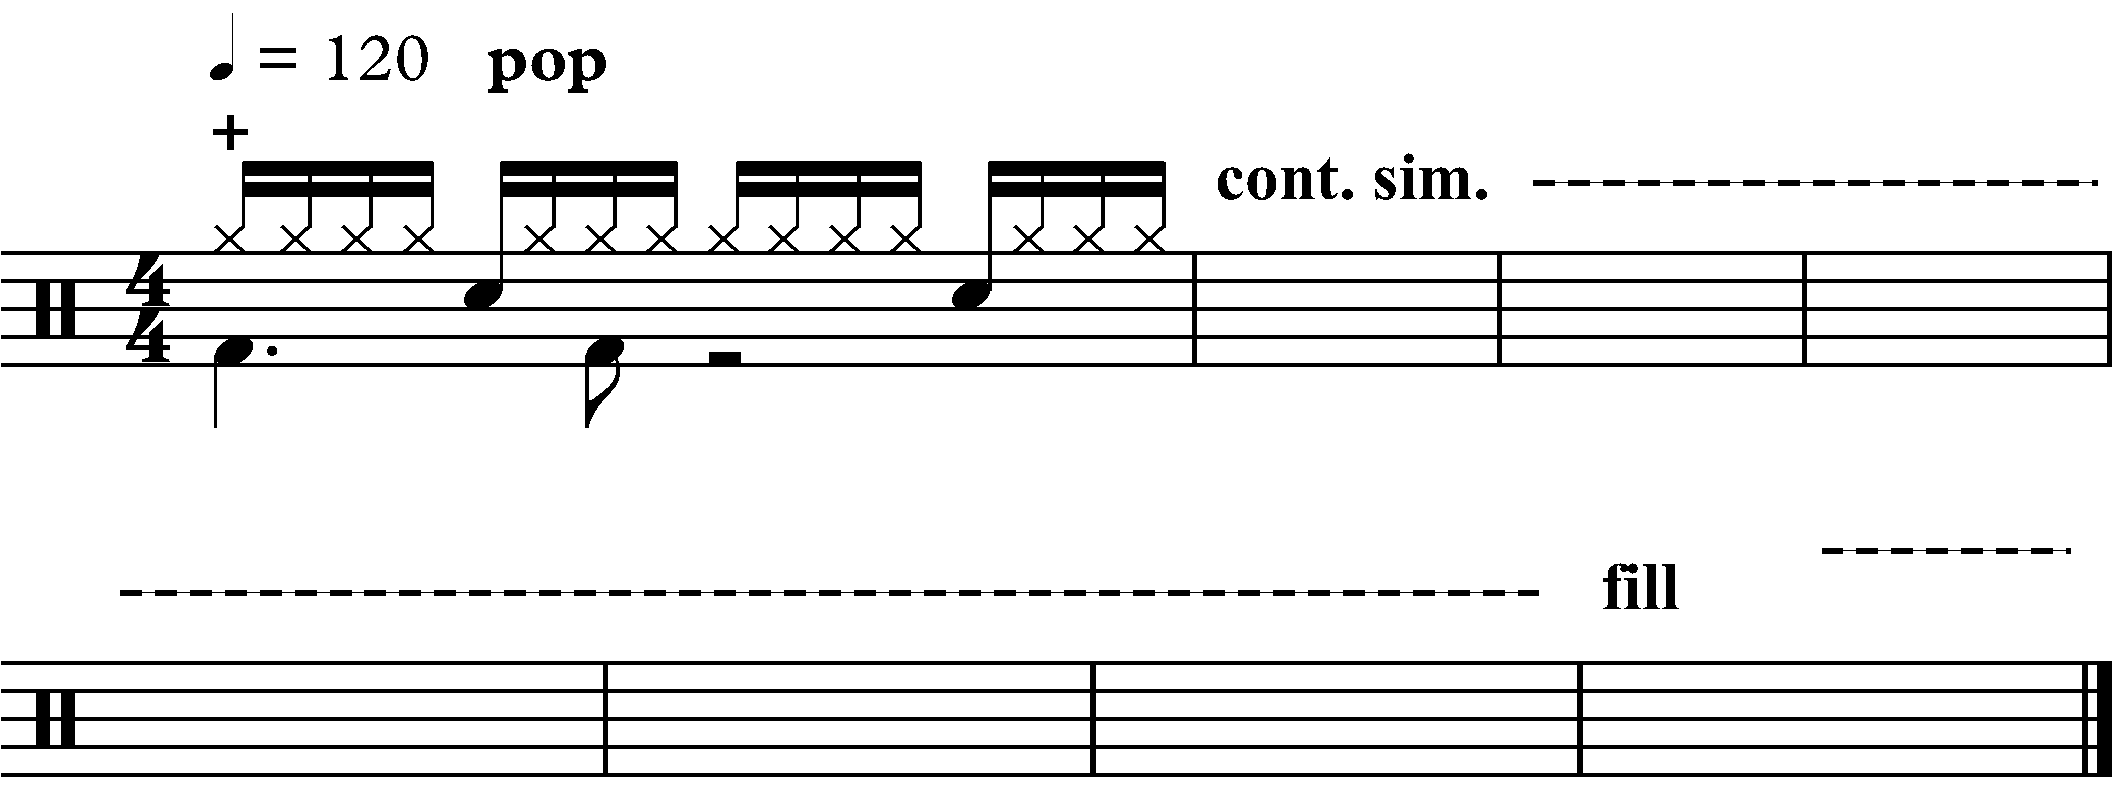 The sheet music for the exercise